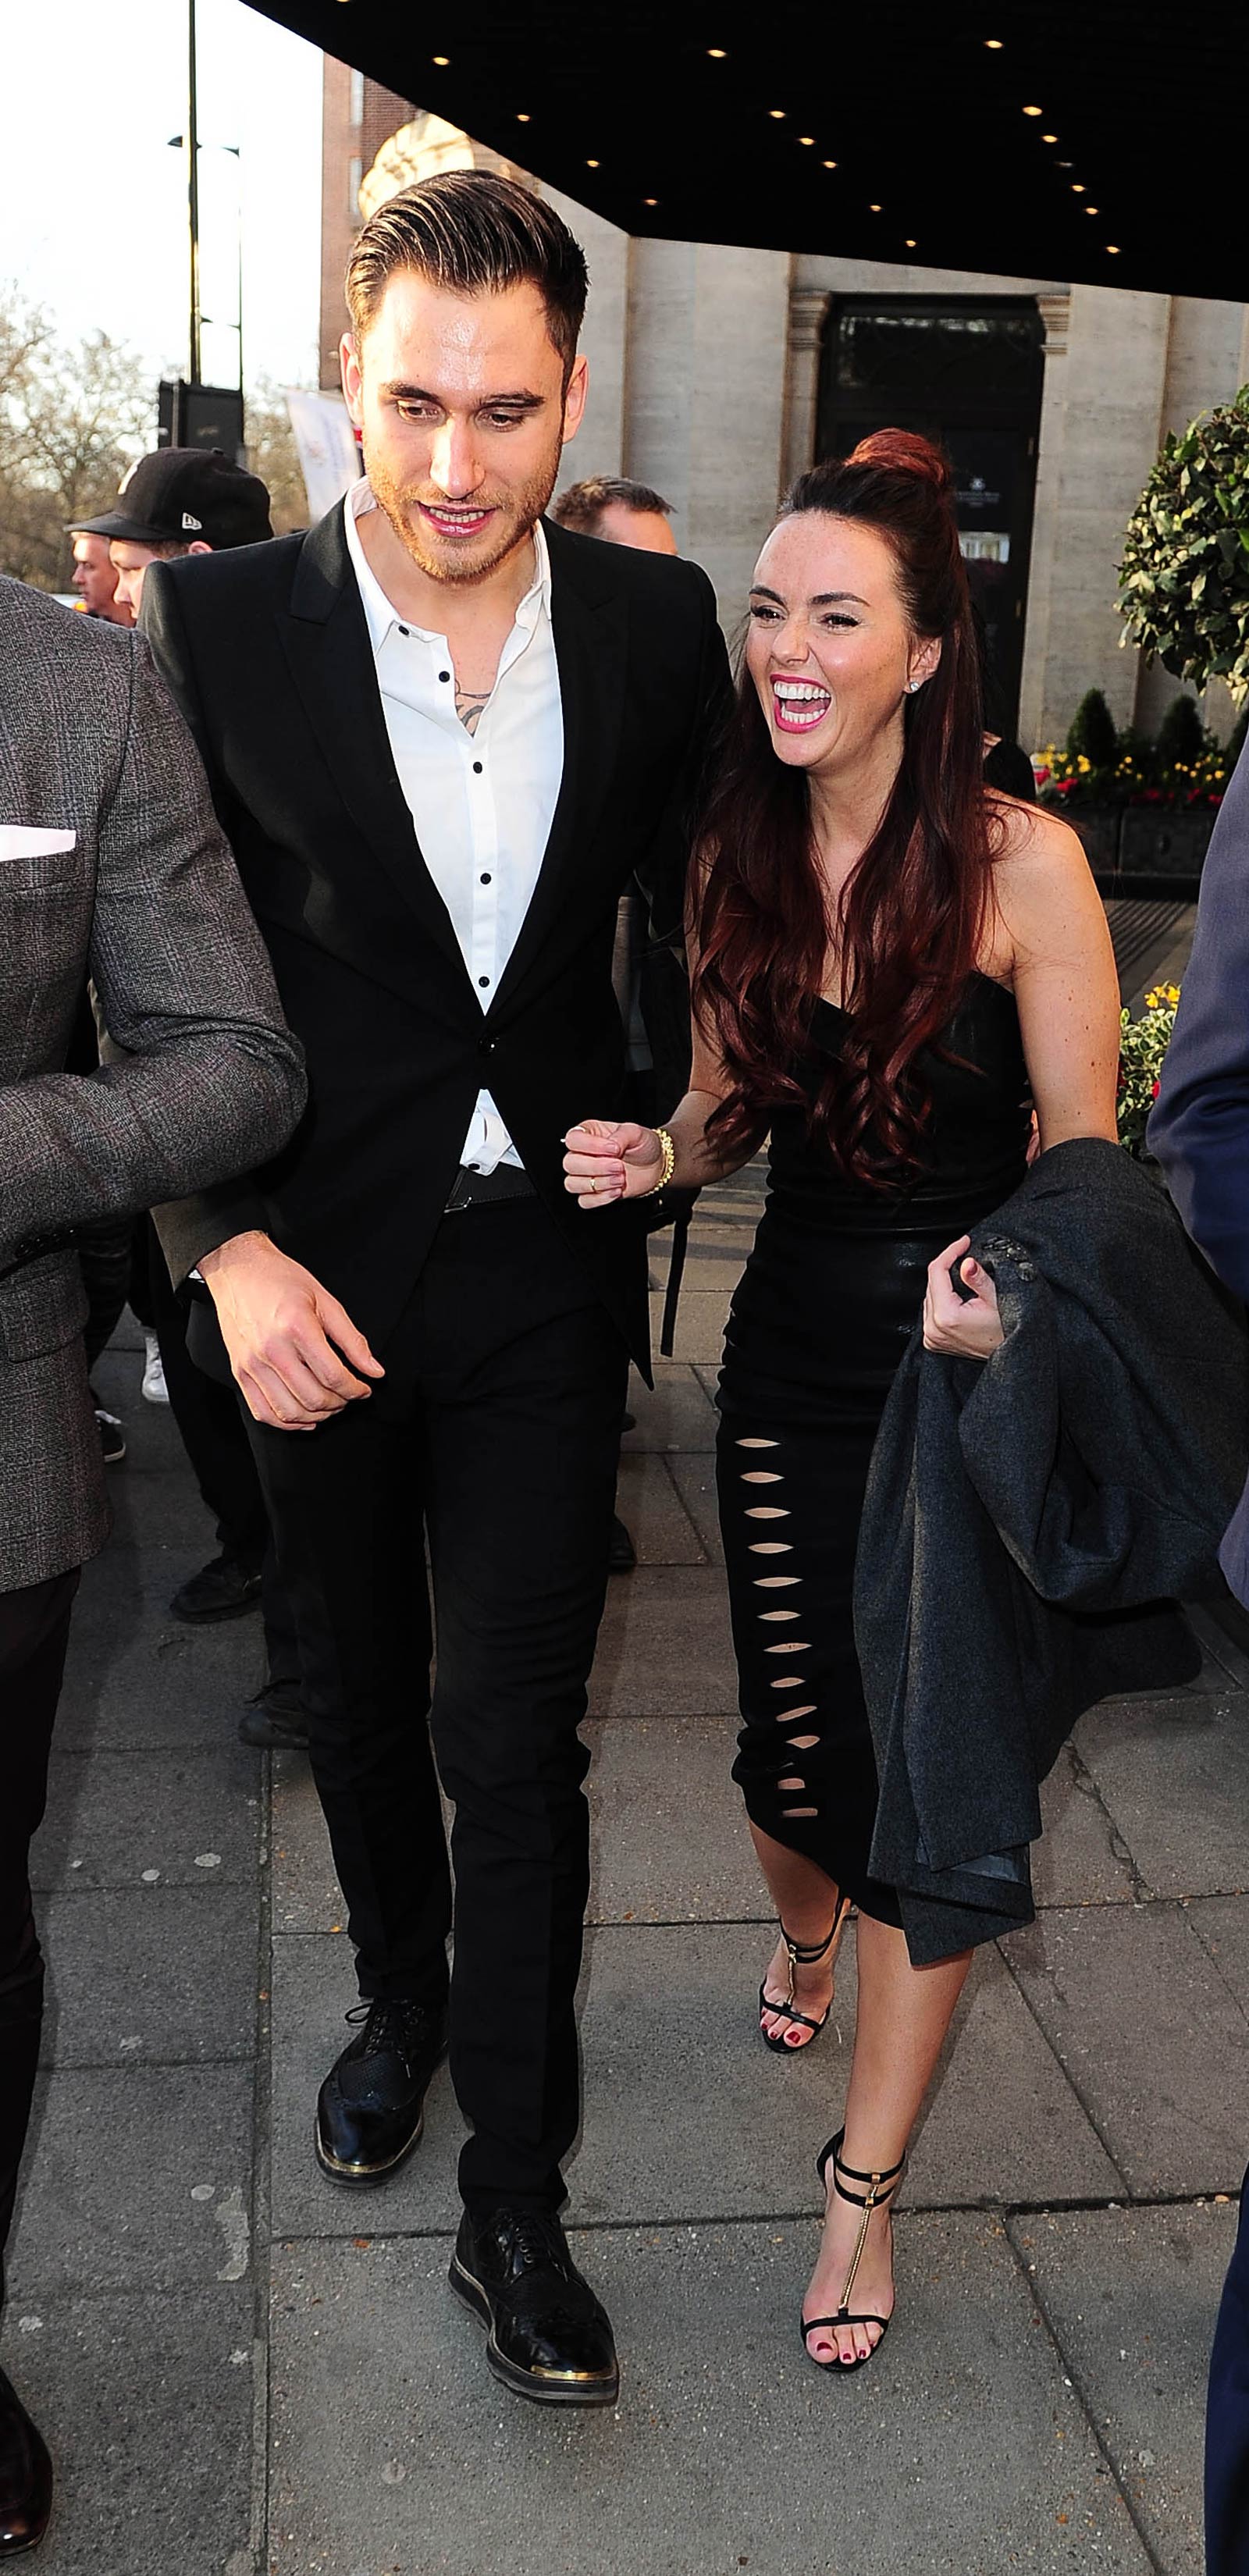 Jennifer Metcalfe attends The TRIC Awards 2015